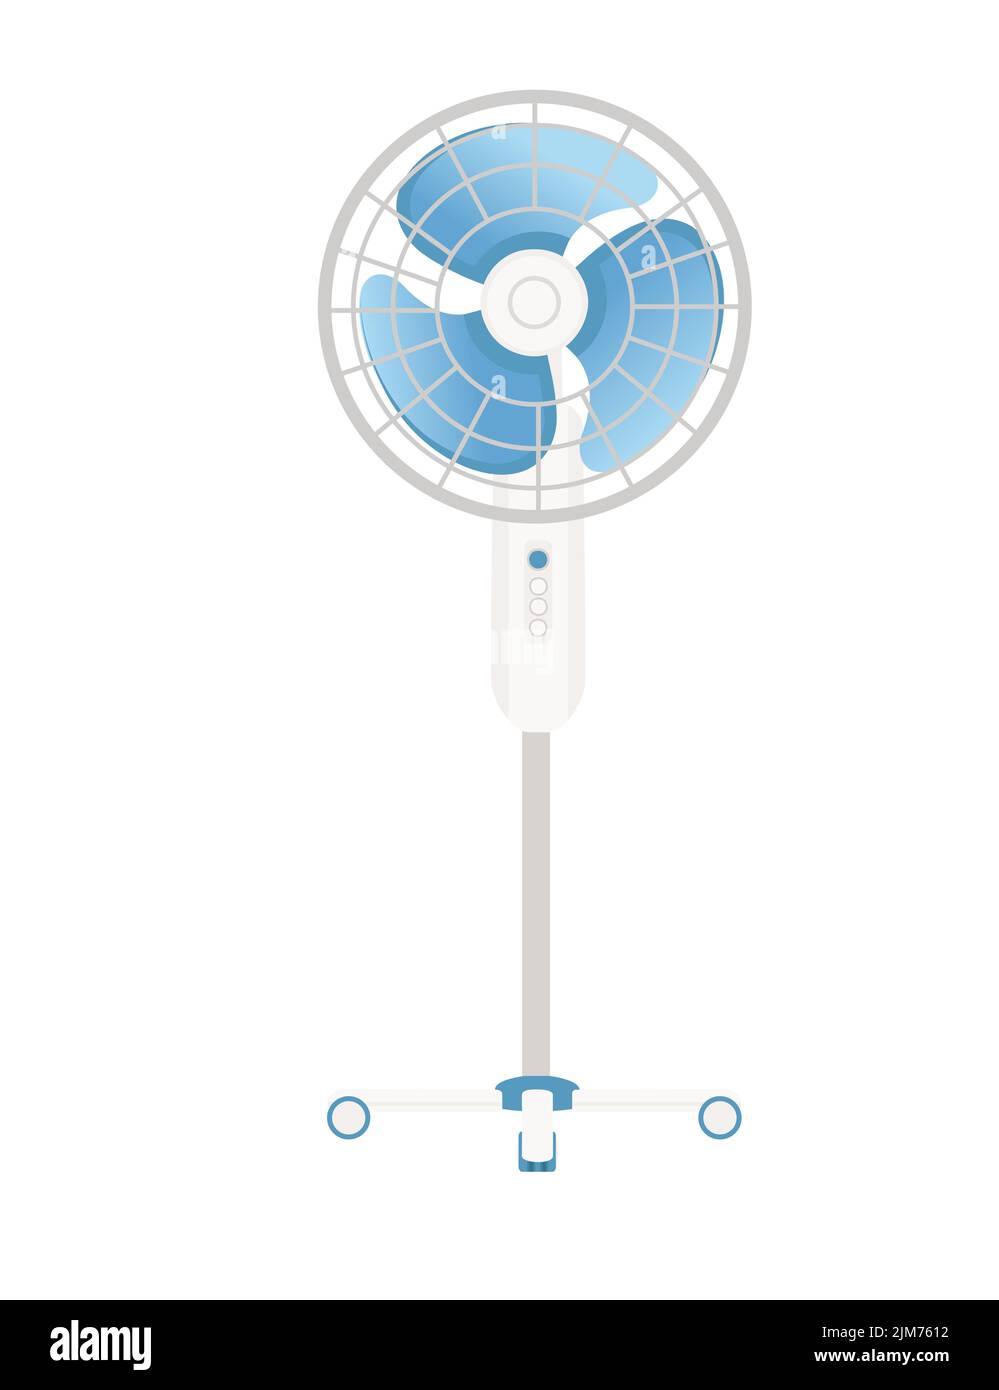 White and blue color home electric fan on stand with wheels vector illustration isolated on white background Stock Vector